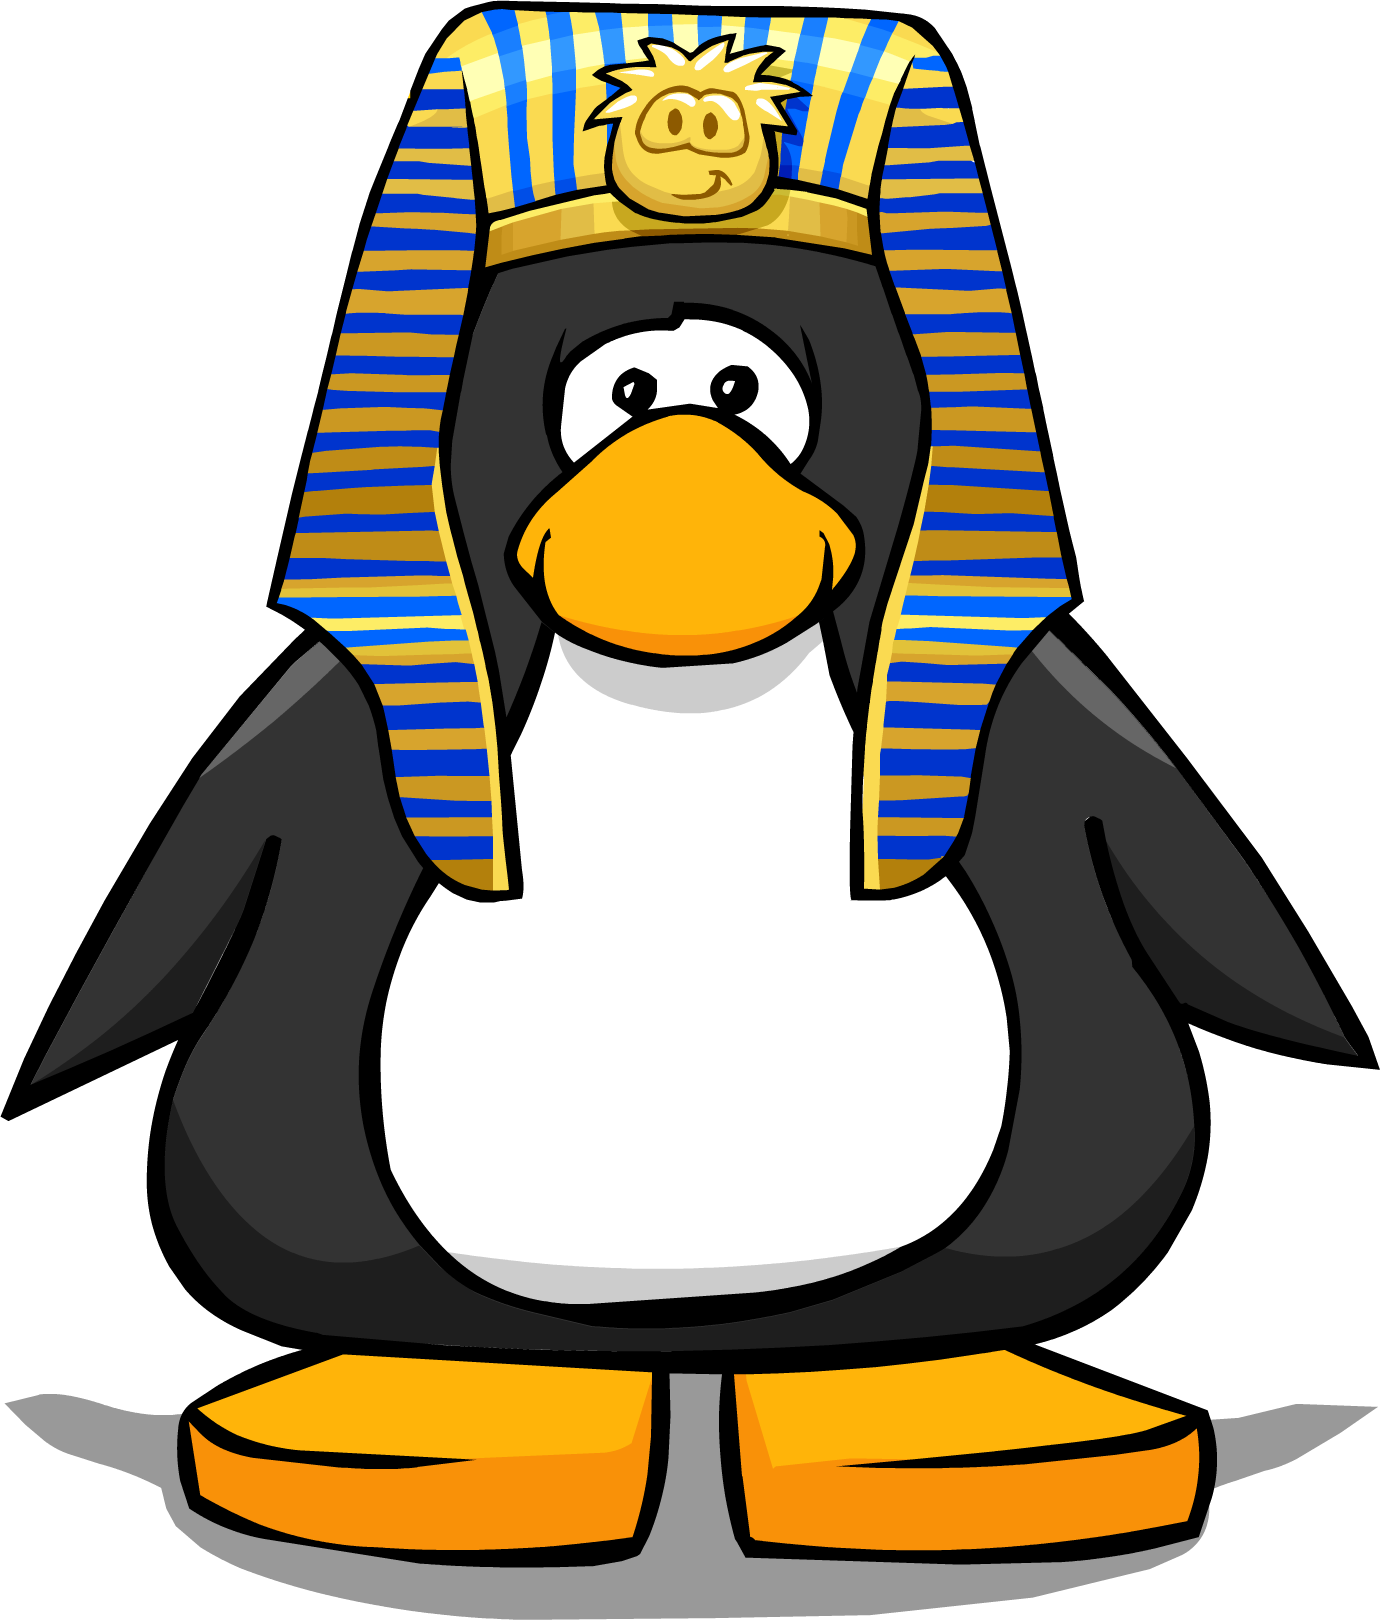 Pharaoh Headdress From A Player Card - Club Penguin Tour Guide Hat (1380x1620)